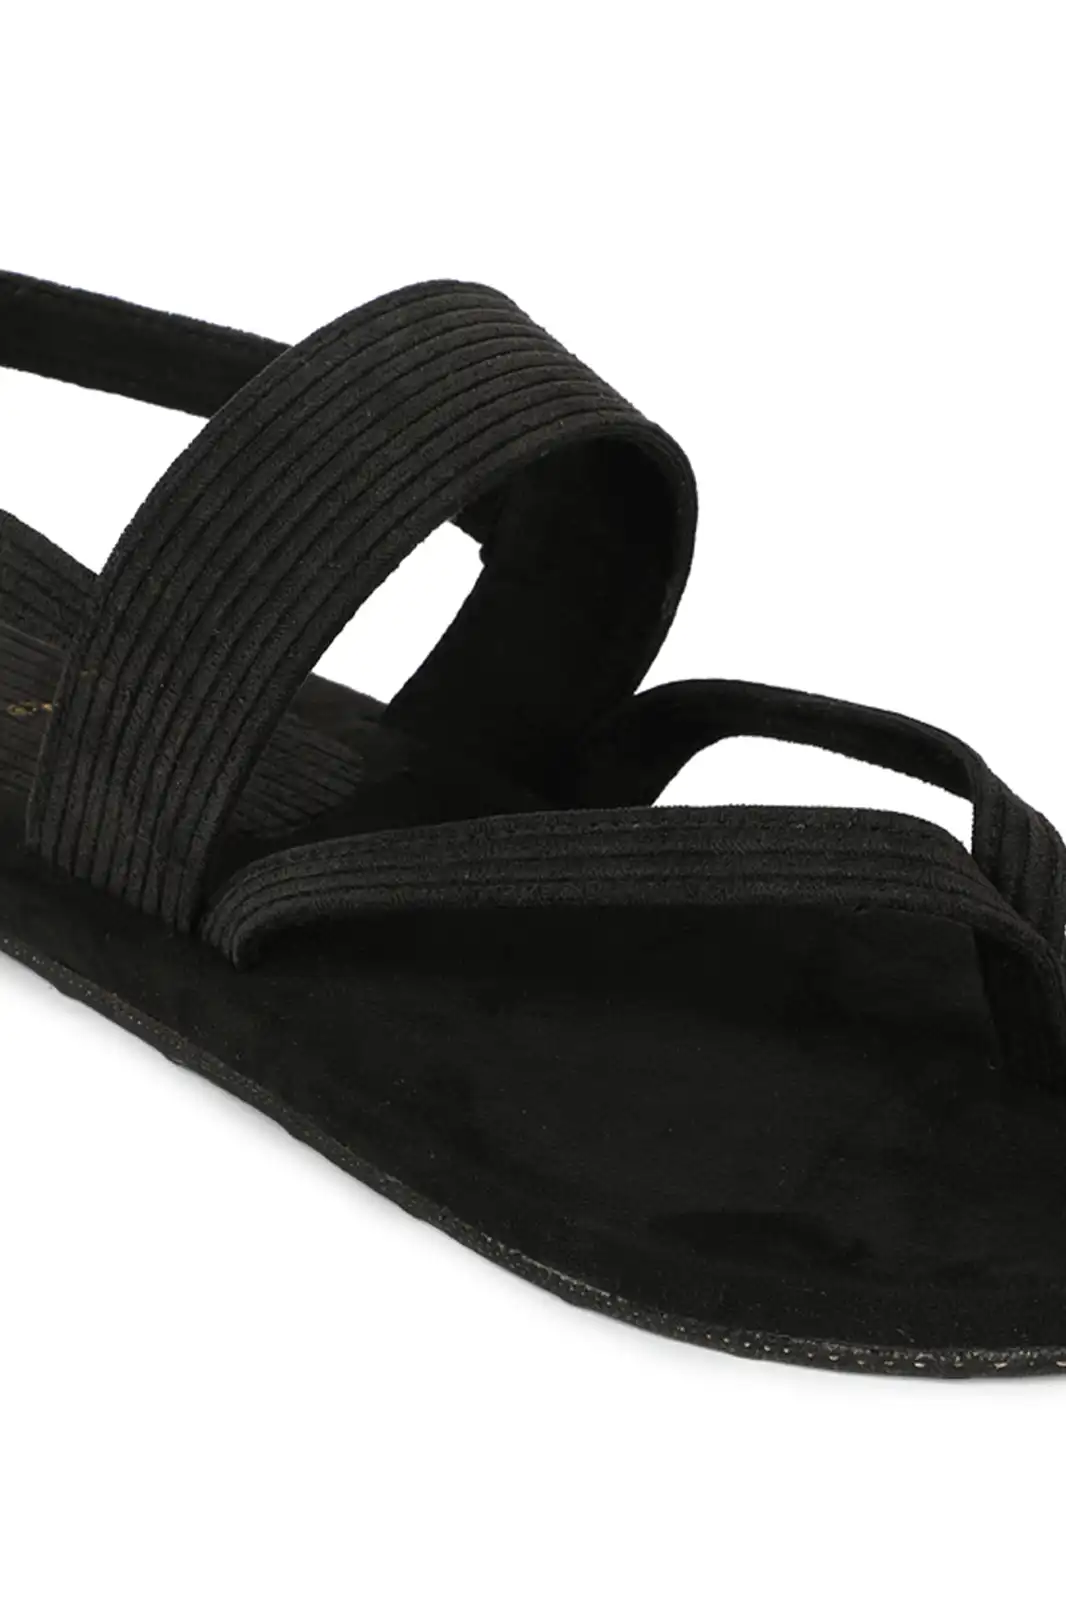 Buy KFC Black and Red Colour Men Sandals Online at Best Prices in India -  JioMart.